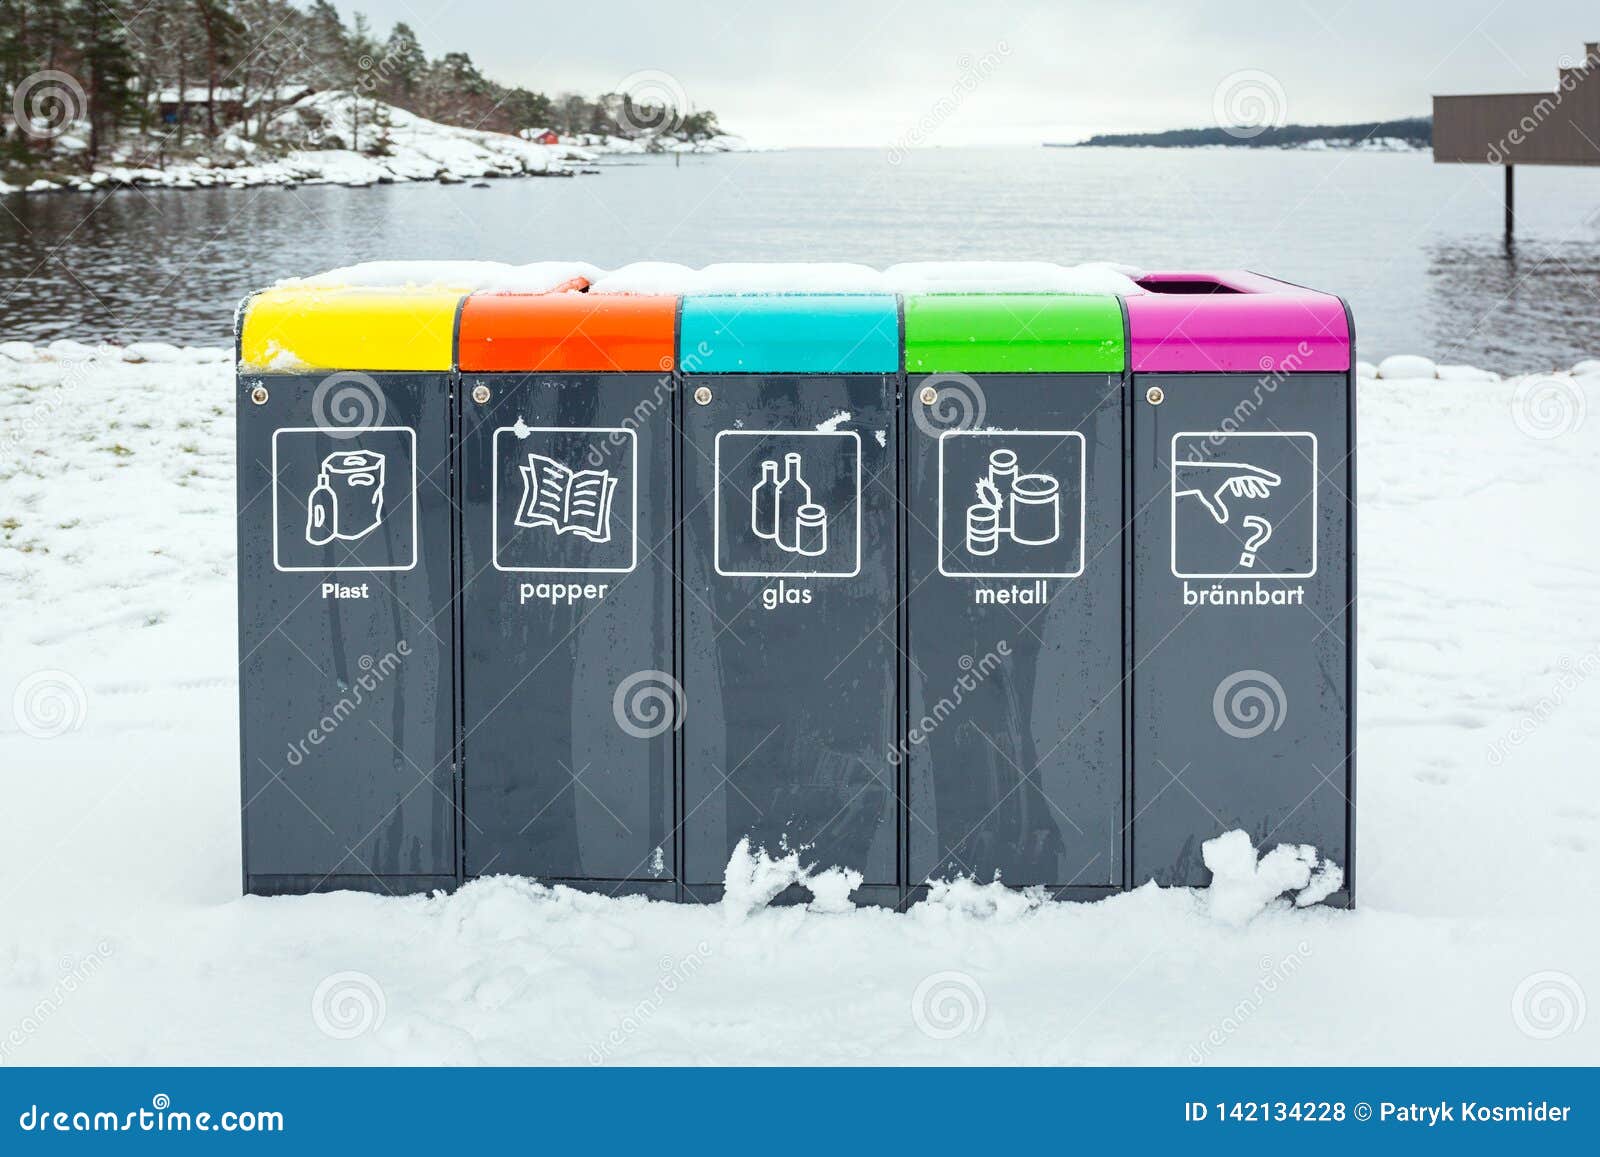 recycling bins at baltic sea of sweden for protect environment